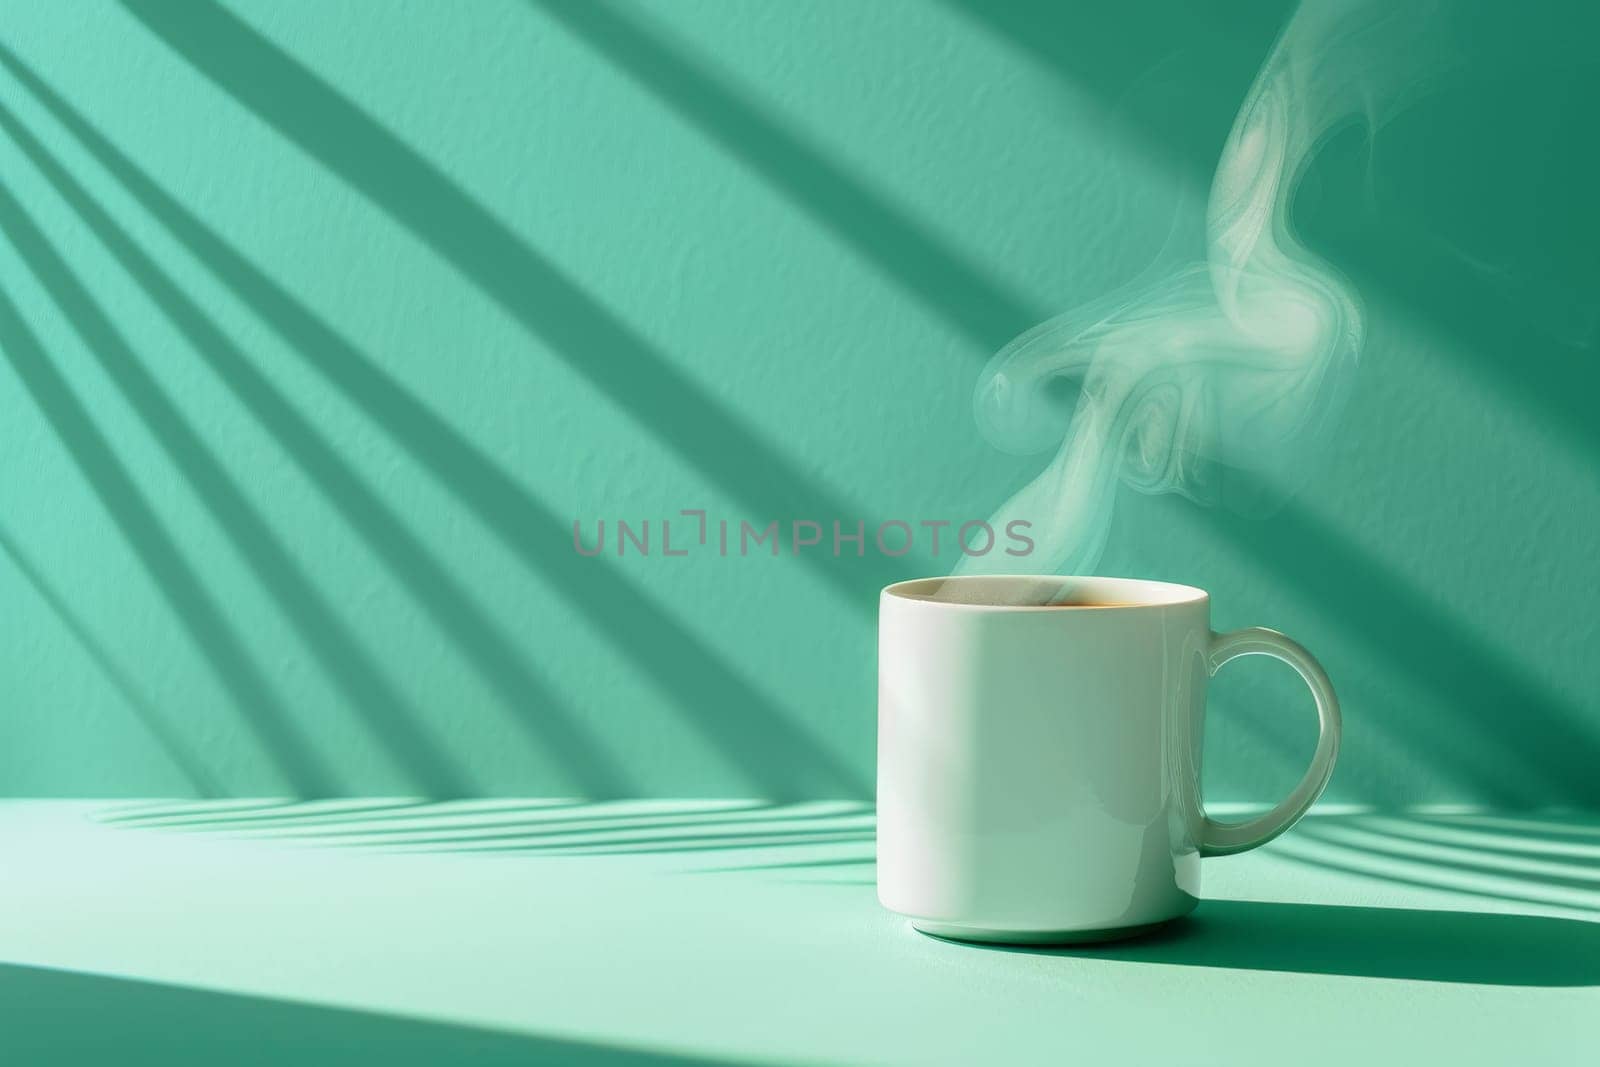 White mockup mug and little smoke with green plant leaves on green background.